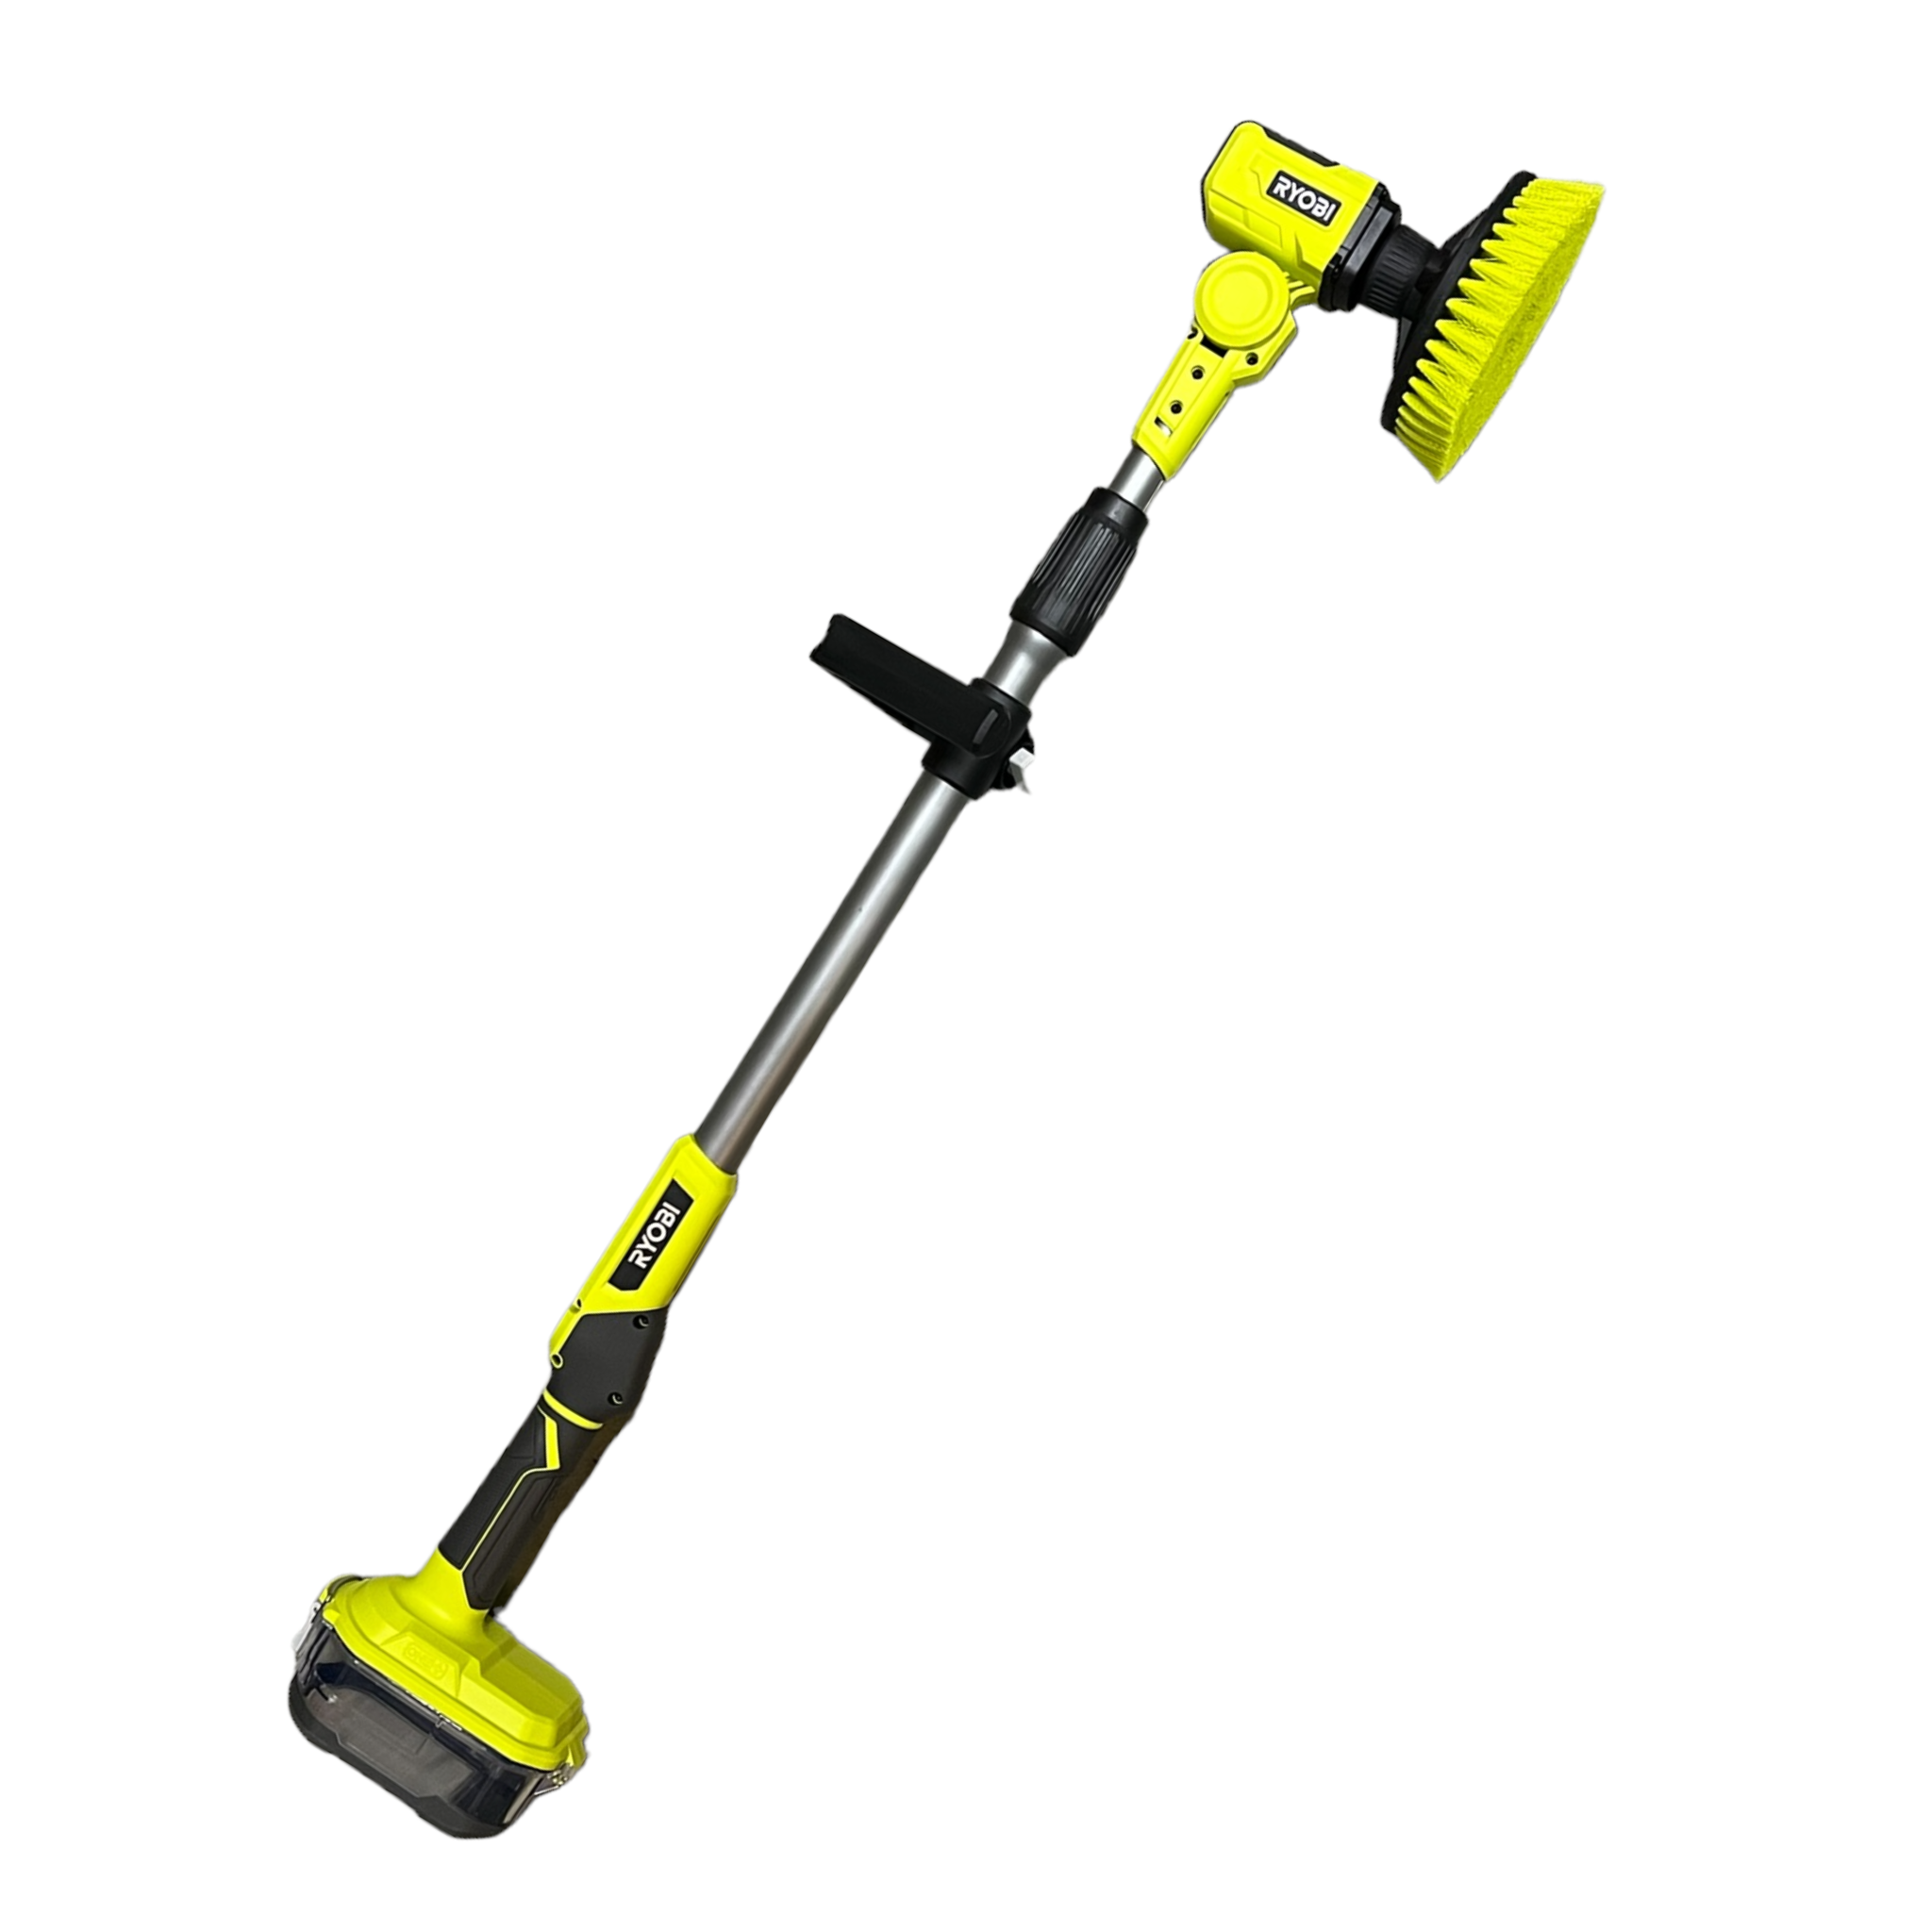 Ryobi One+ 18V Cordless Power Scrubber (Tool Only) with 6 in. Sponge Hook and Loop Kit